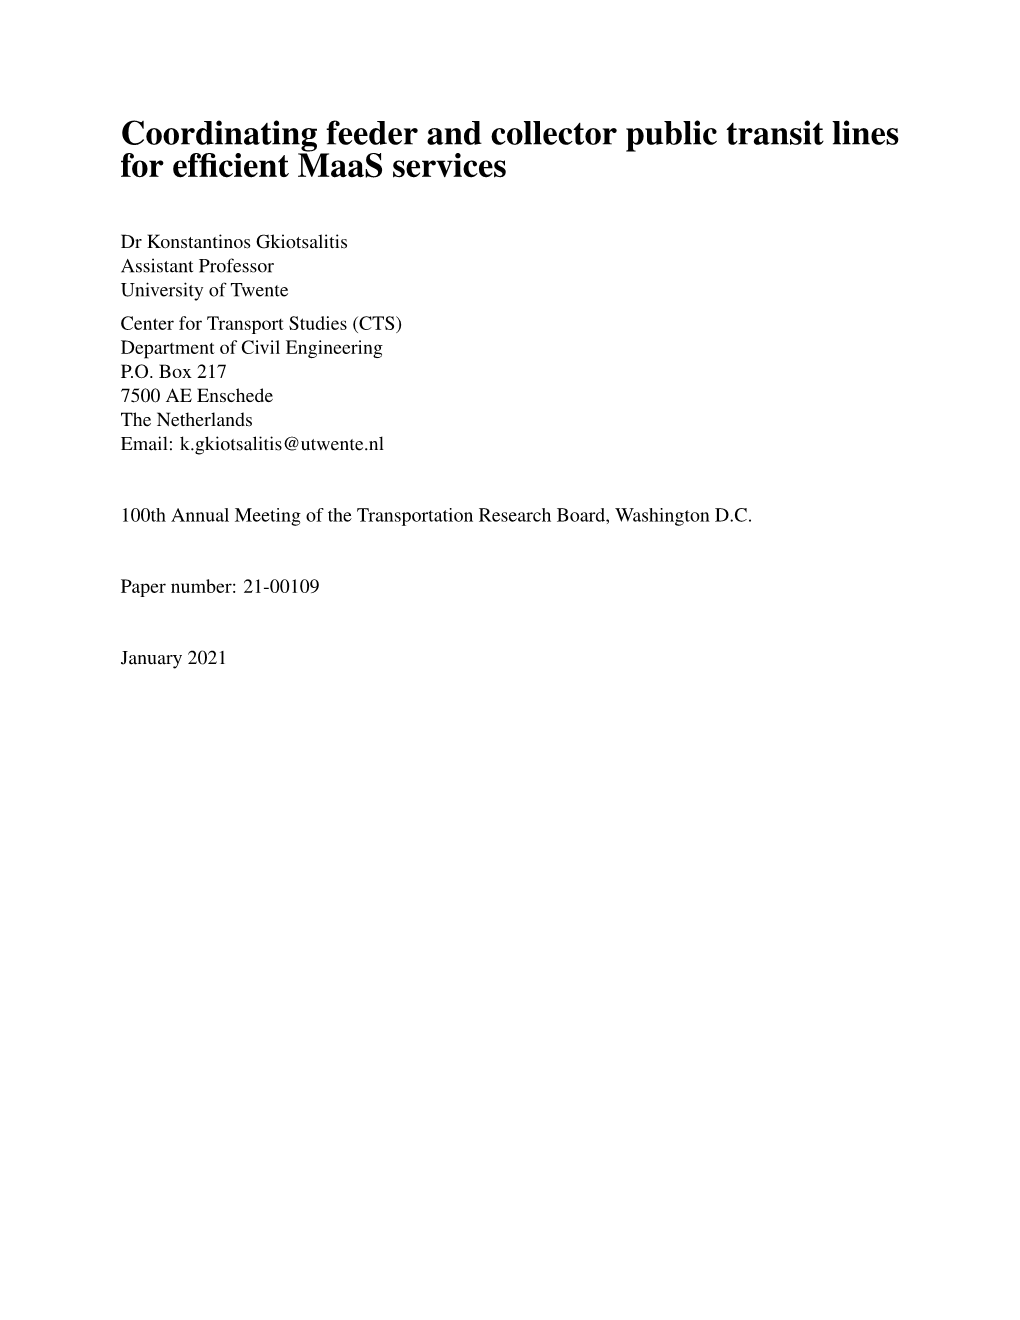 Coordinating Feeder and Collector Public Transit Lines for Efficient Maas